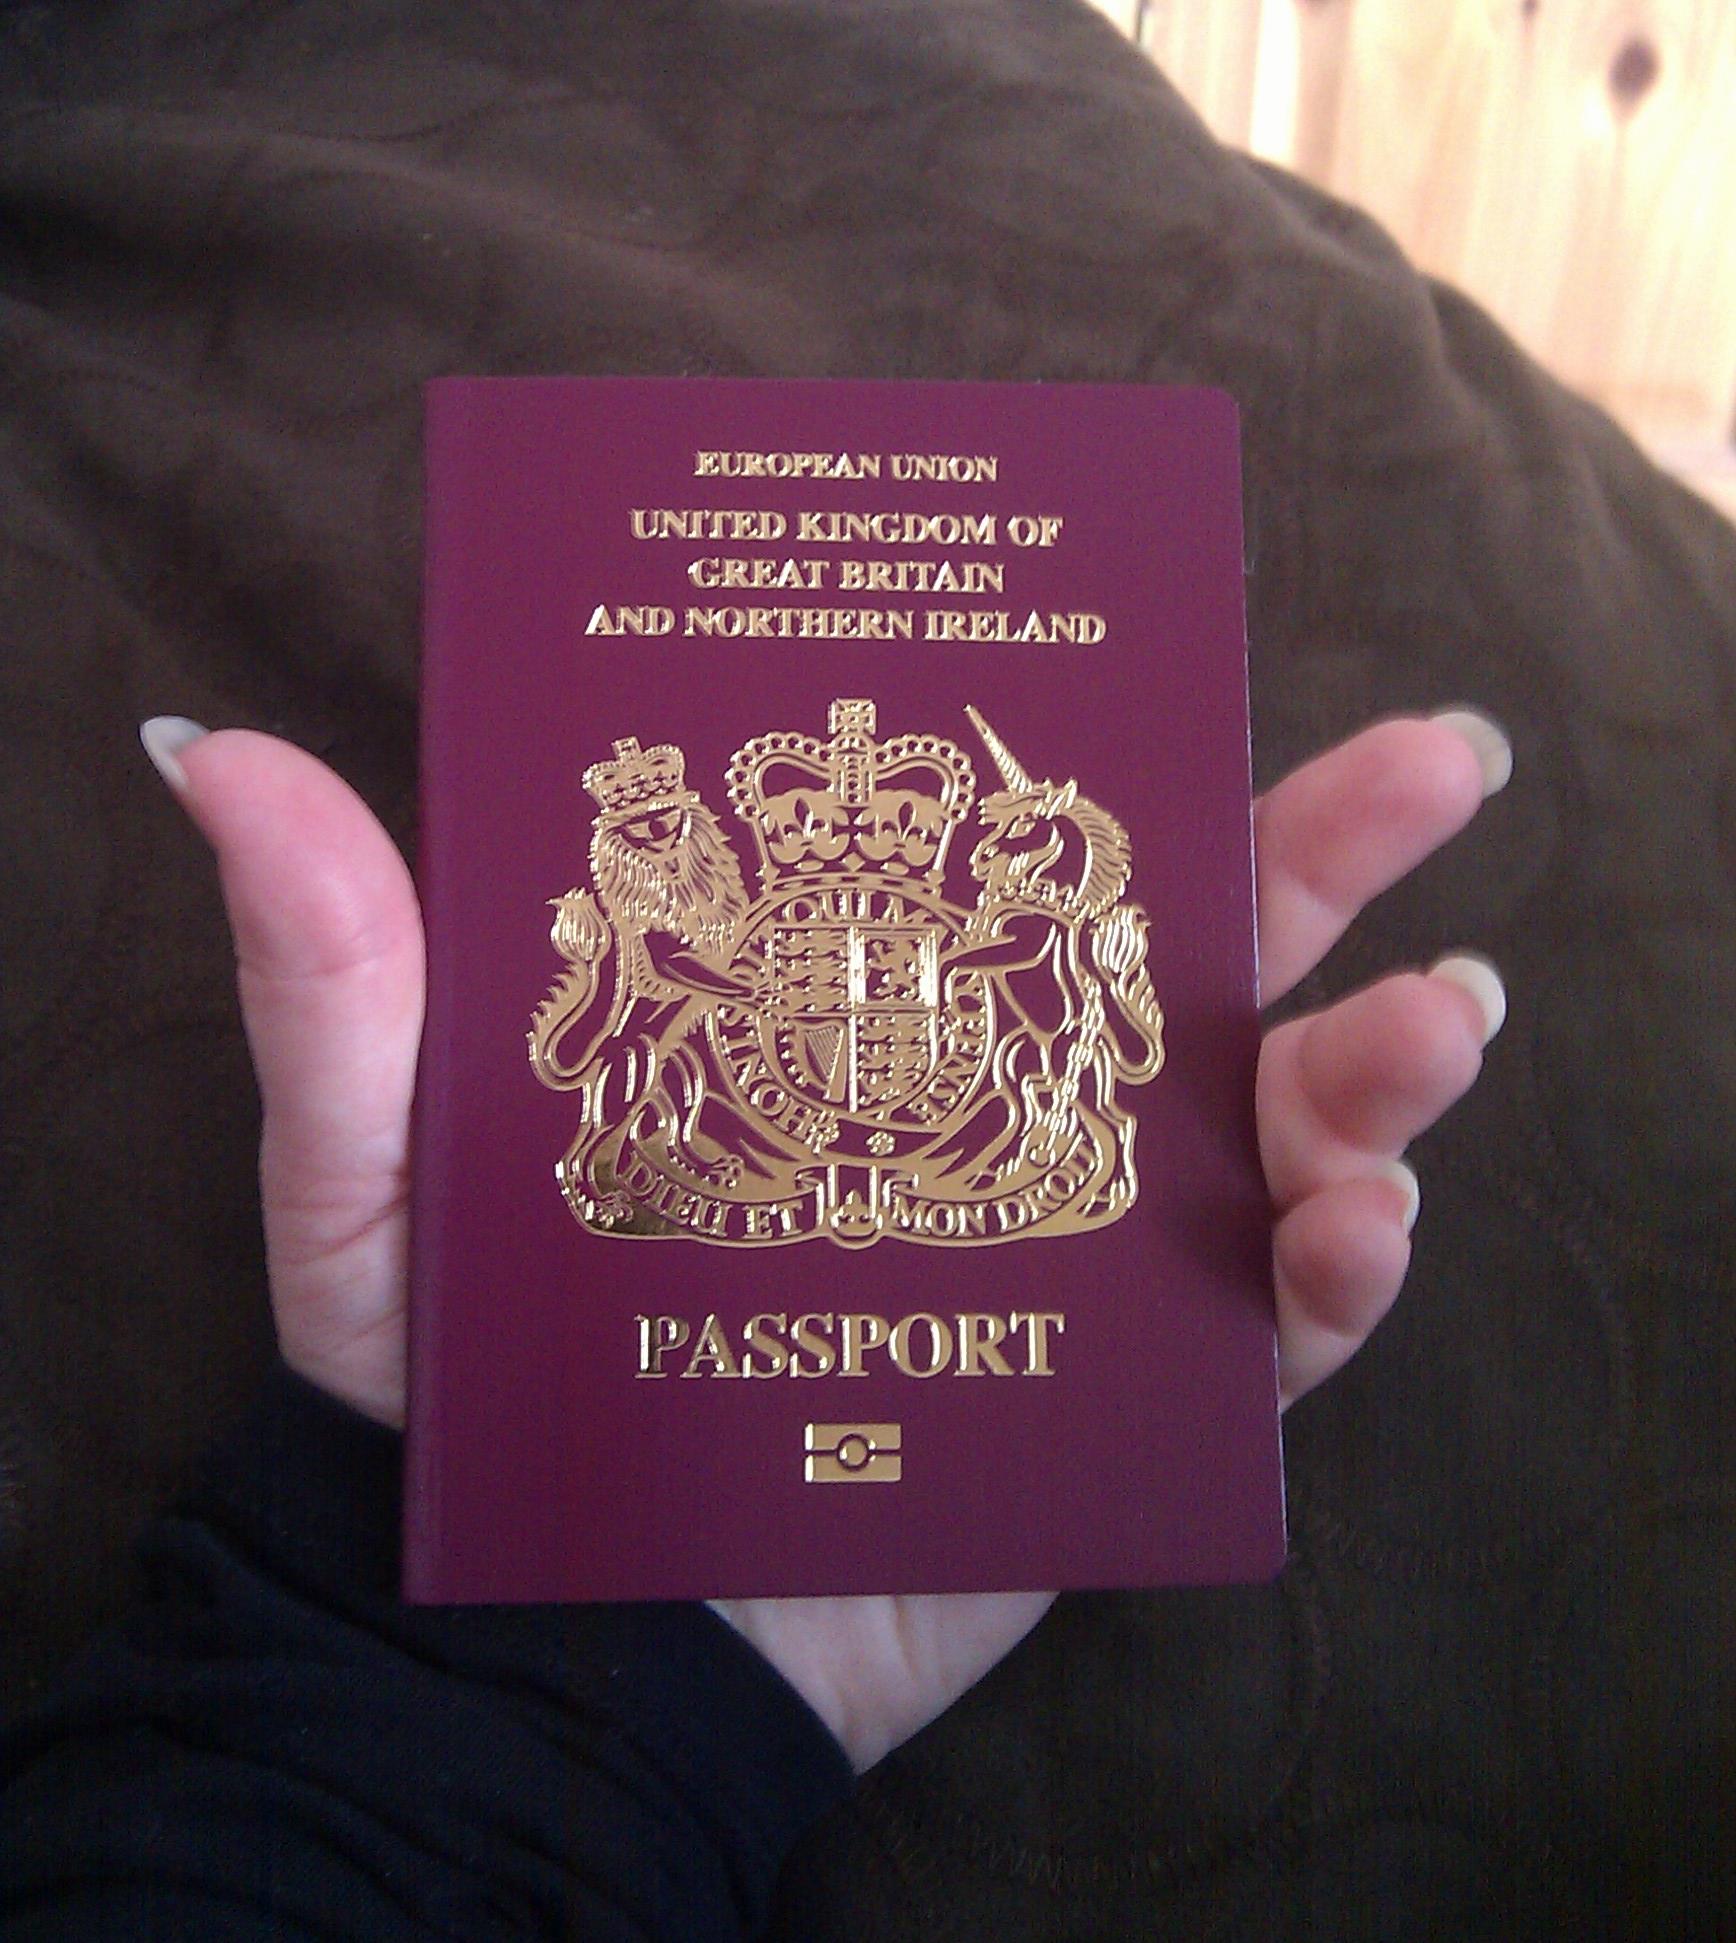 Passport to all things right and proper!